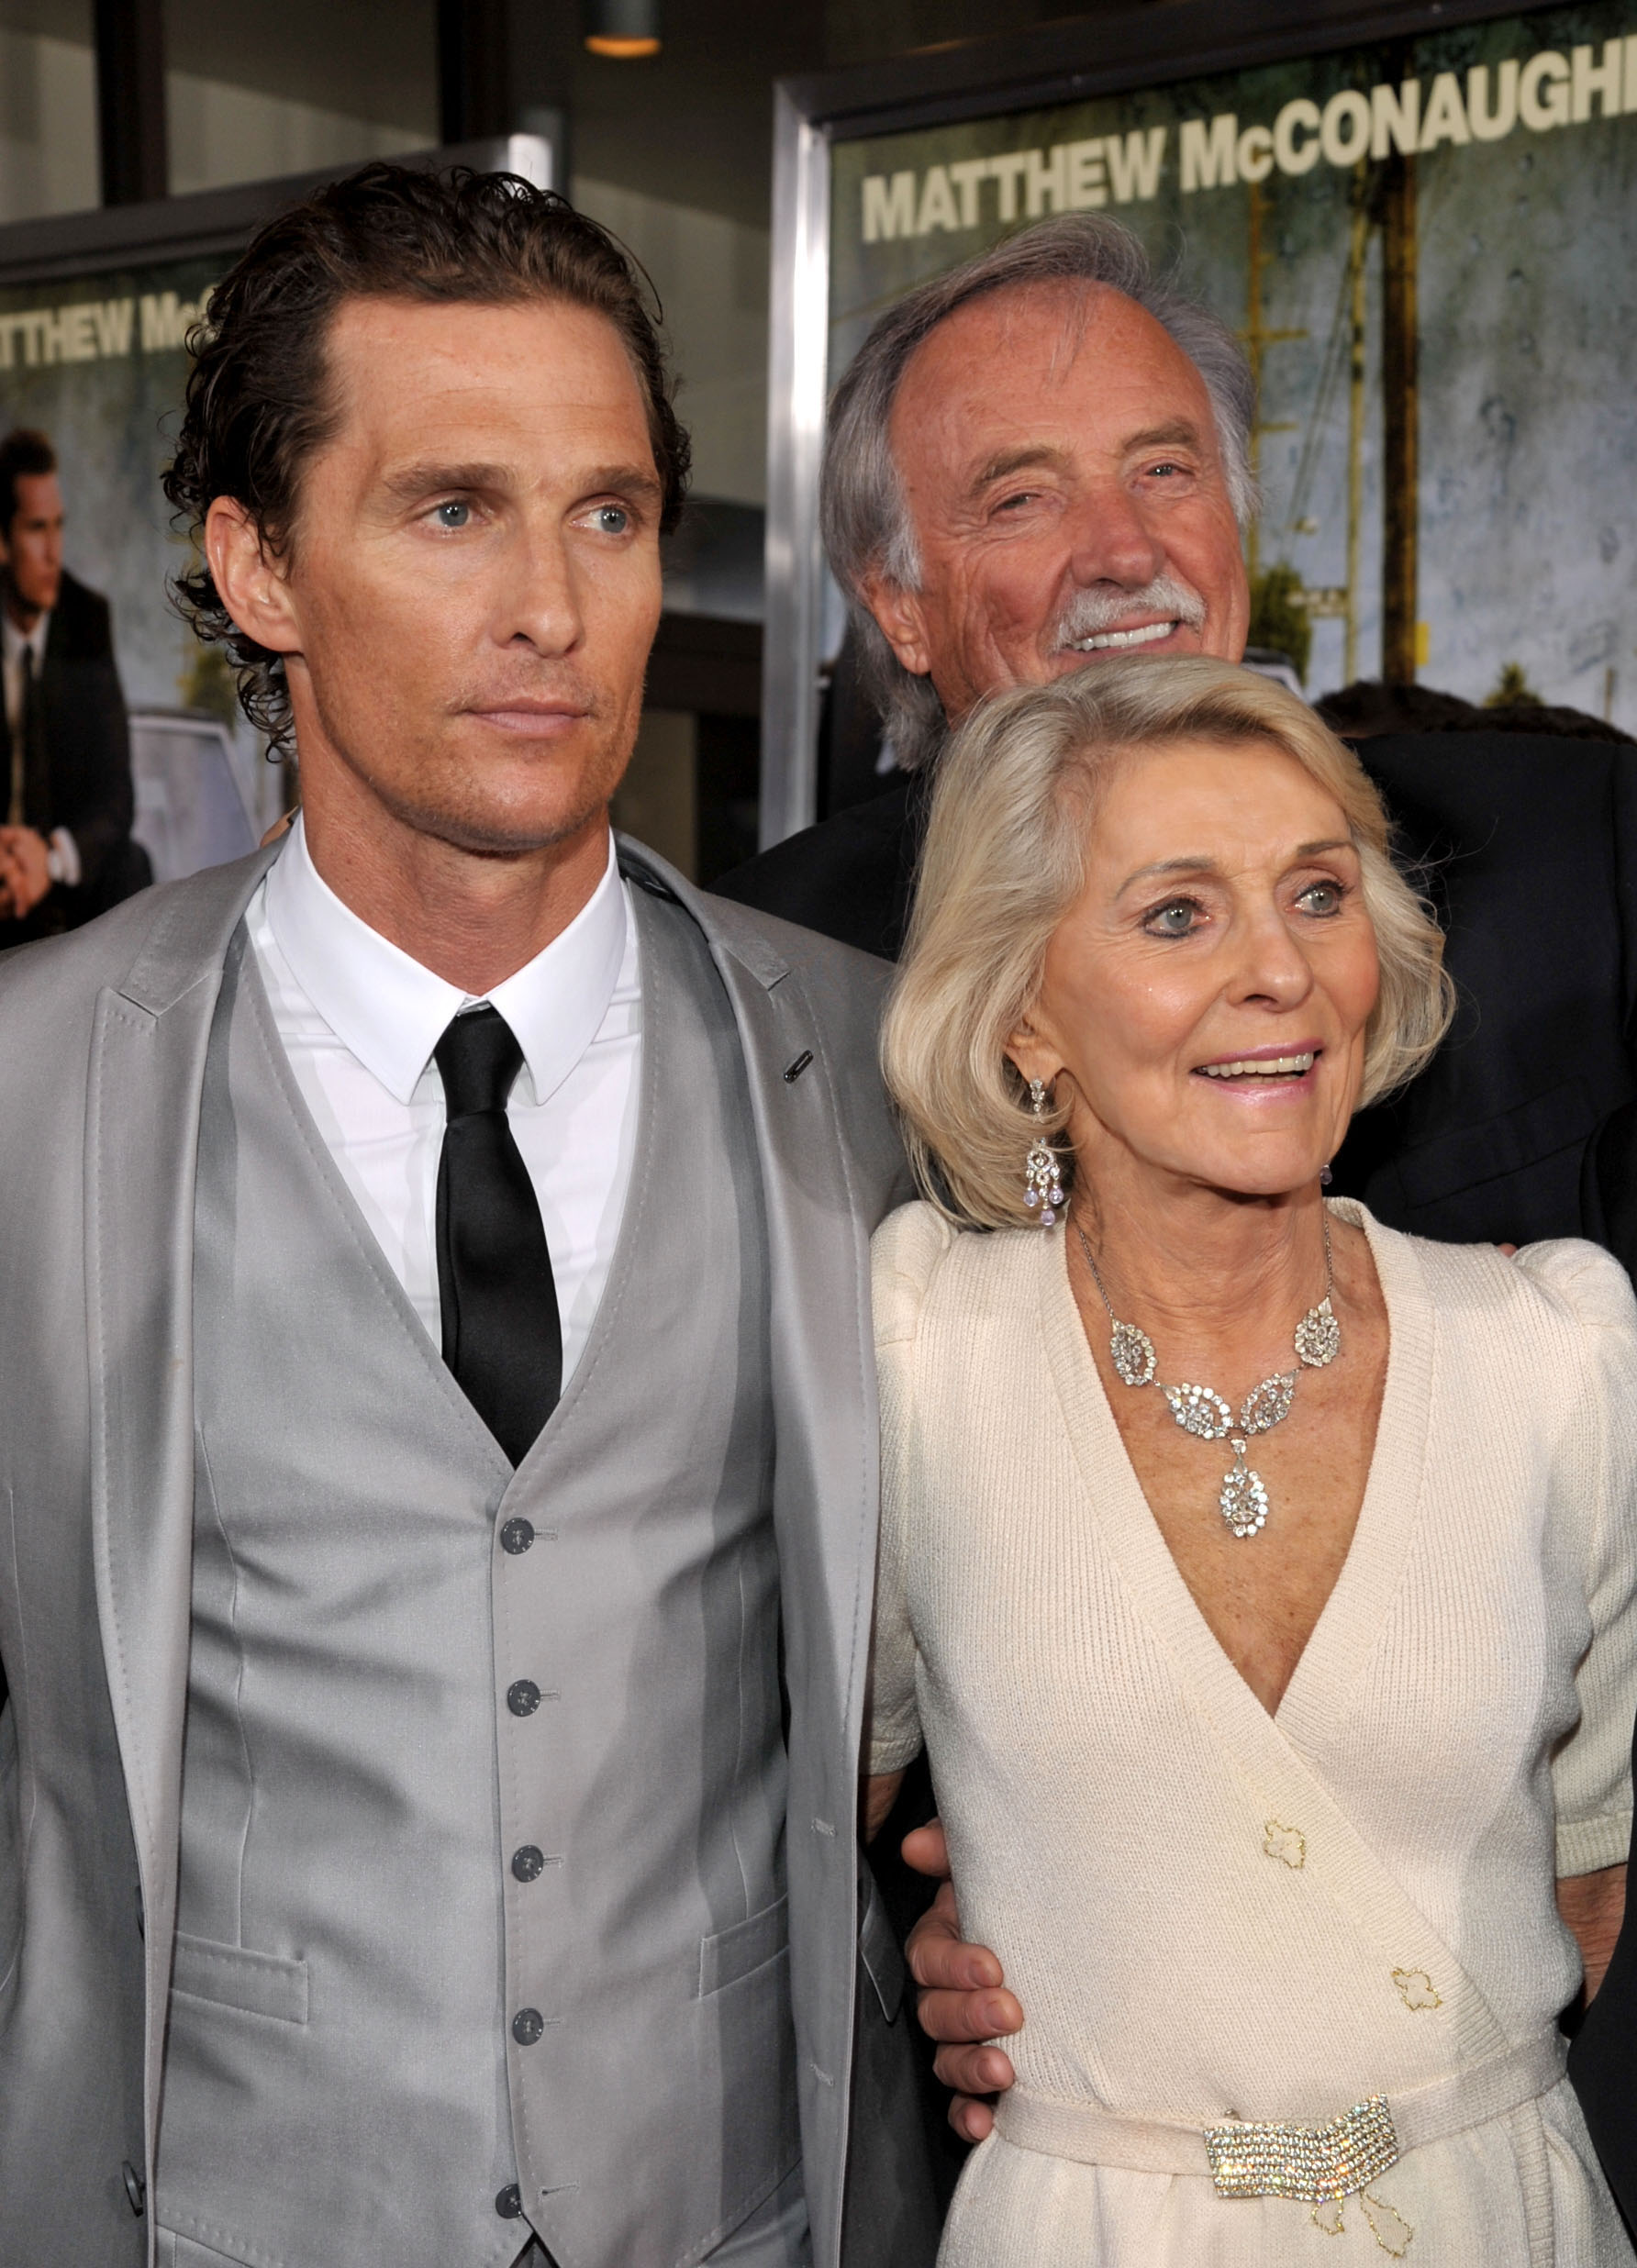 Matthew McConaughey with his parents Kay McCabe and James Donald McConaughey at ArcLight Cinemas on March 10, 2011 in Hollywood, California | Source: Getty Images